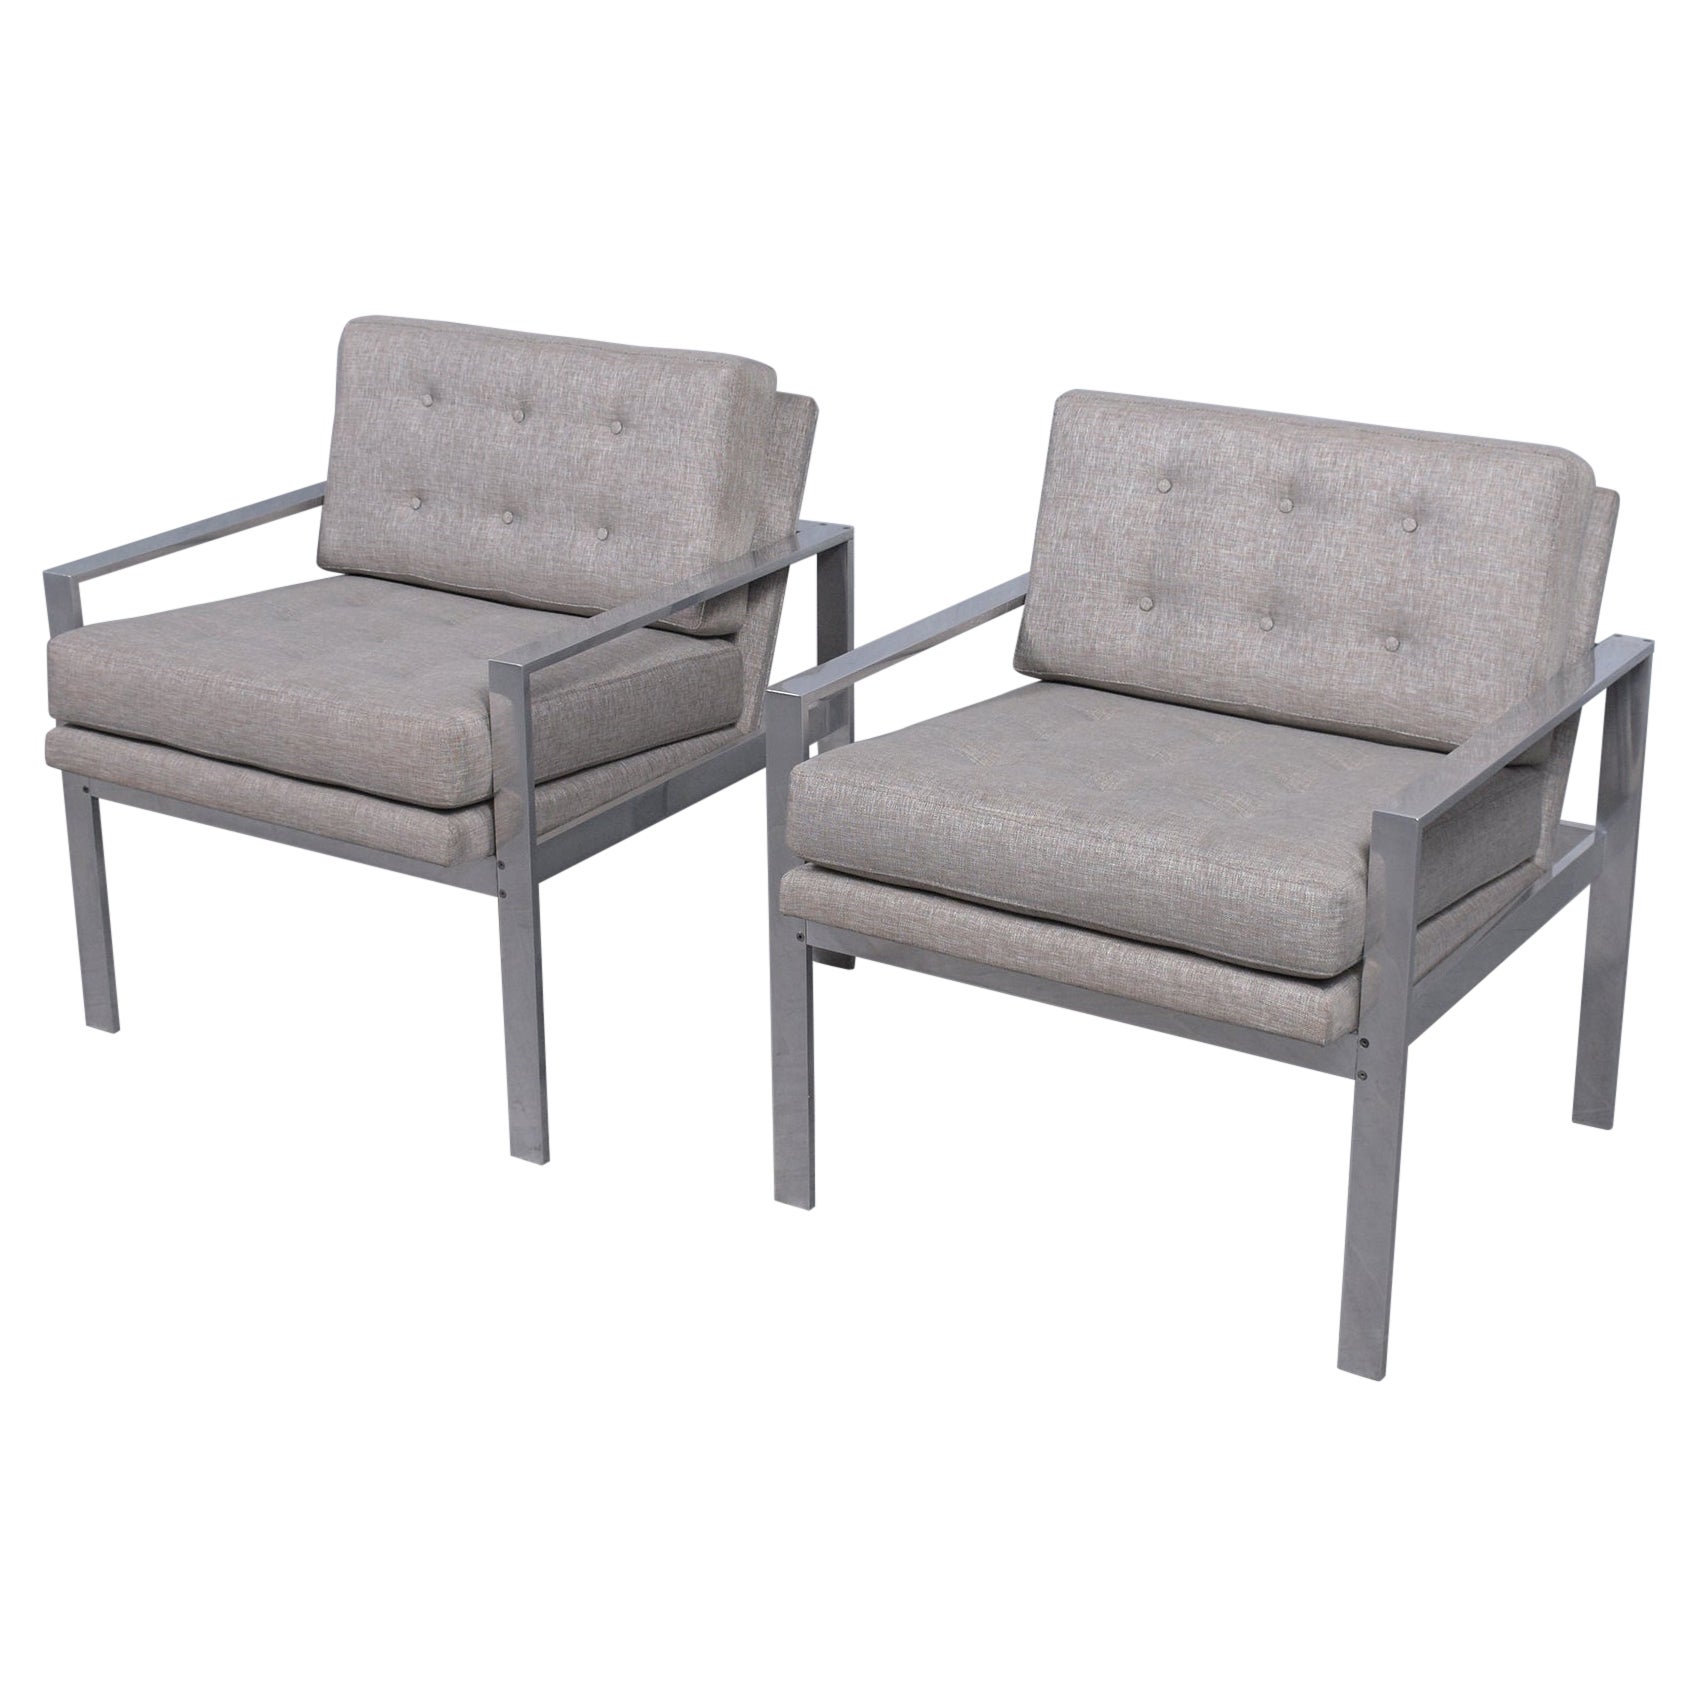 Restored Milo Baughman Lounge Chairs with Polished Aluminum Frames